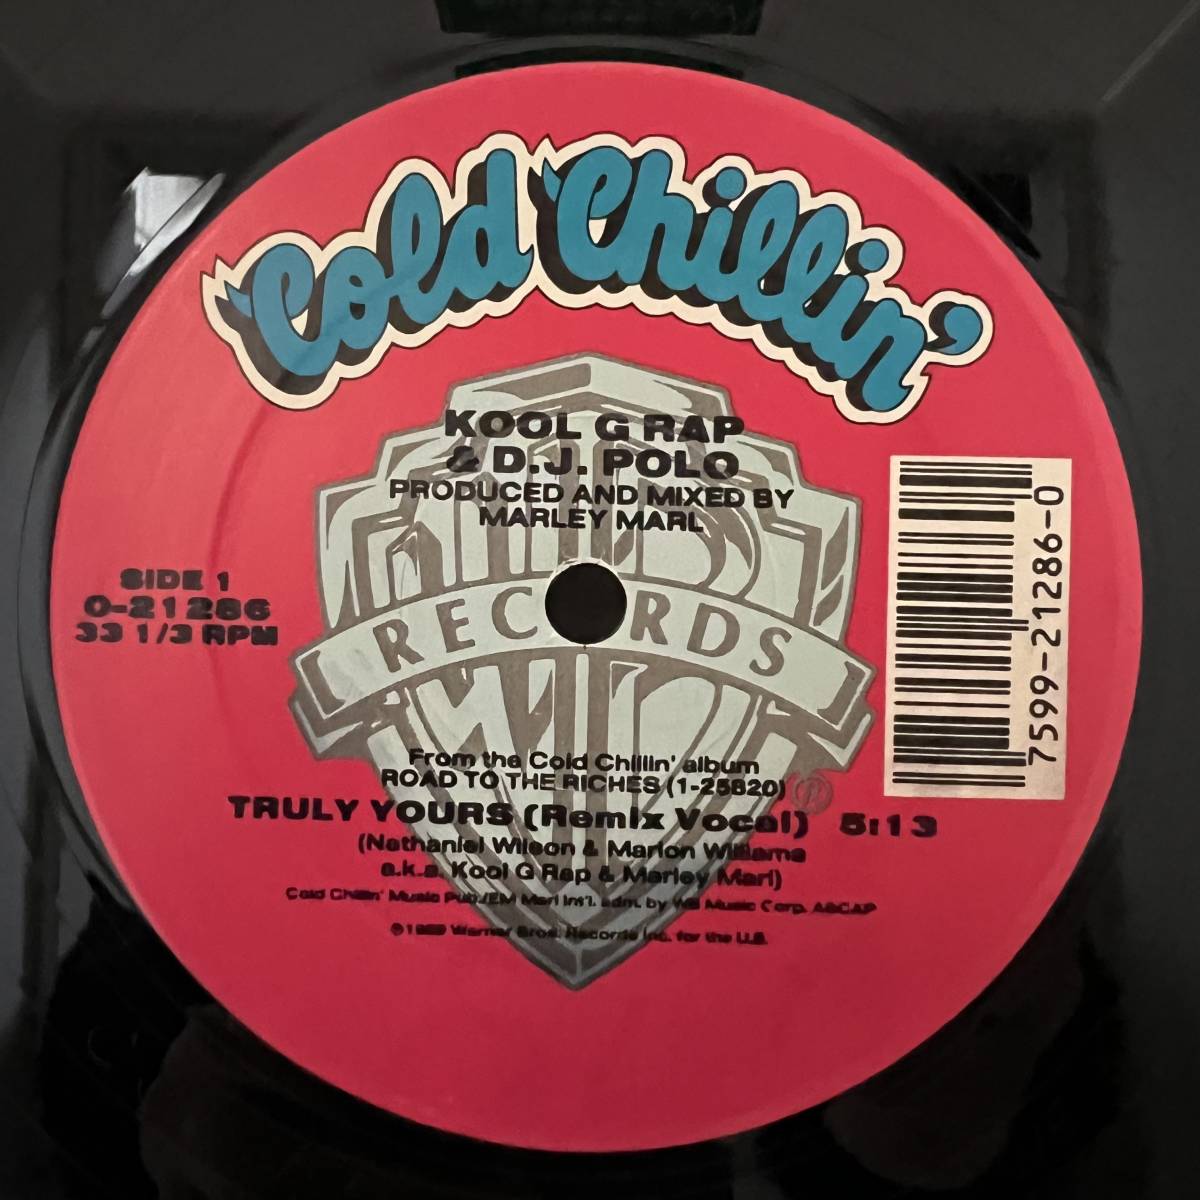 Hip Hop 12 - Kool G RAP & D.J. Polo - Truly Yours - Cold Chillin' - VG+ - シュリンク付_画像2